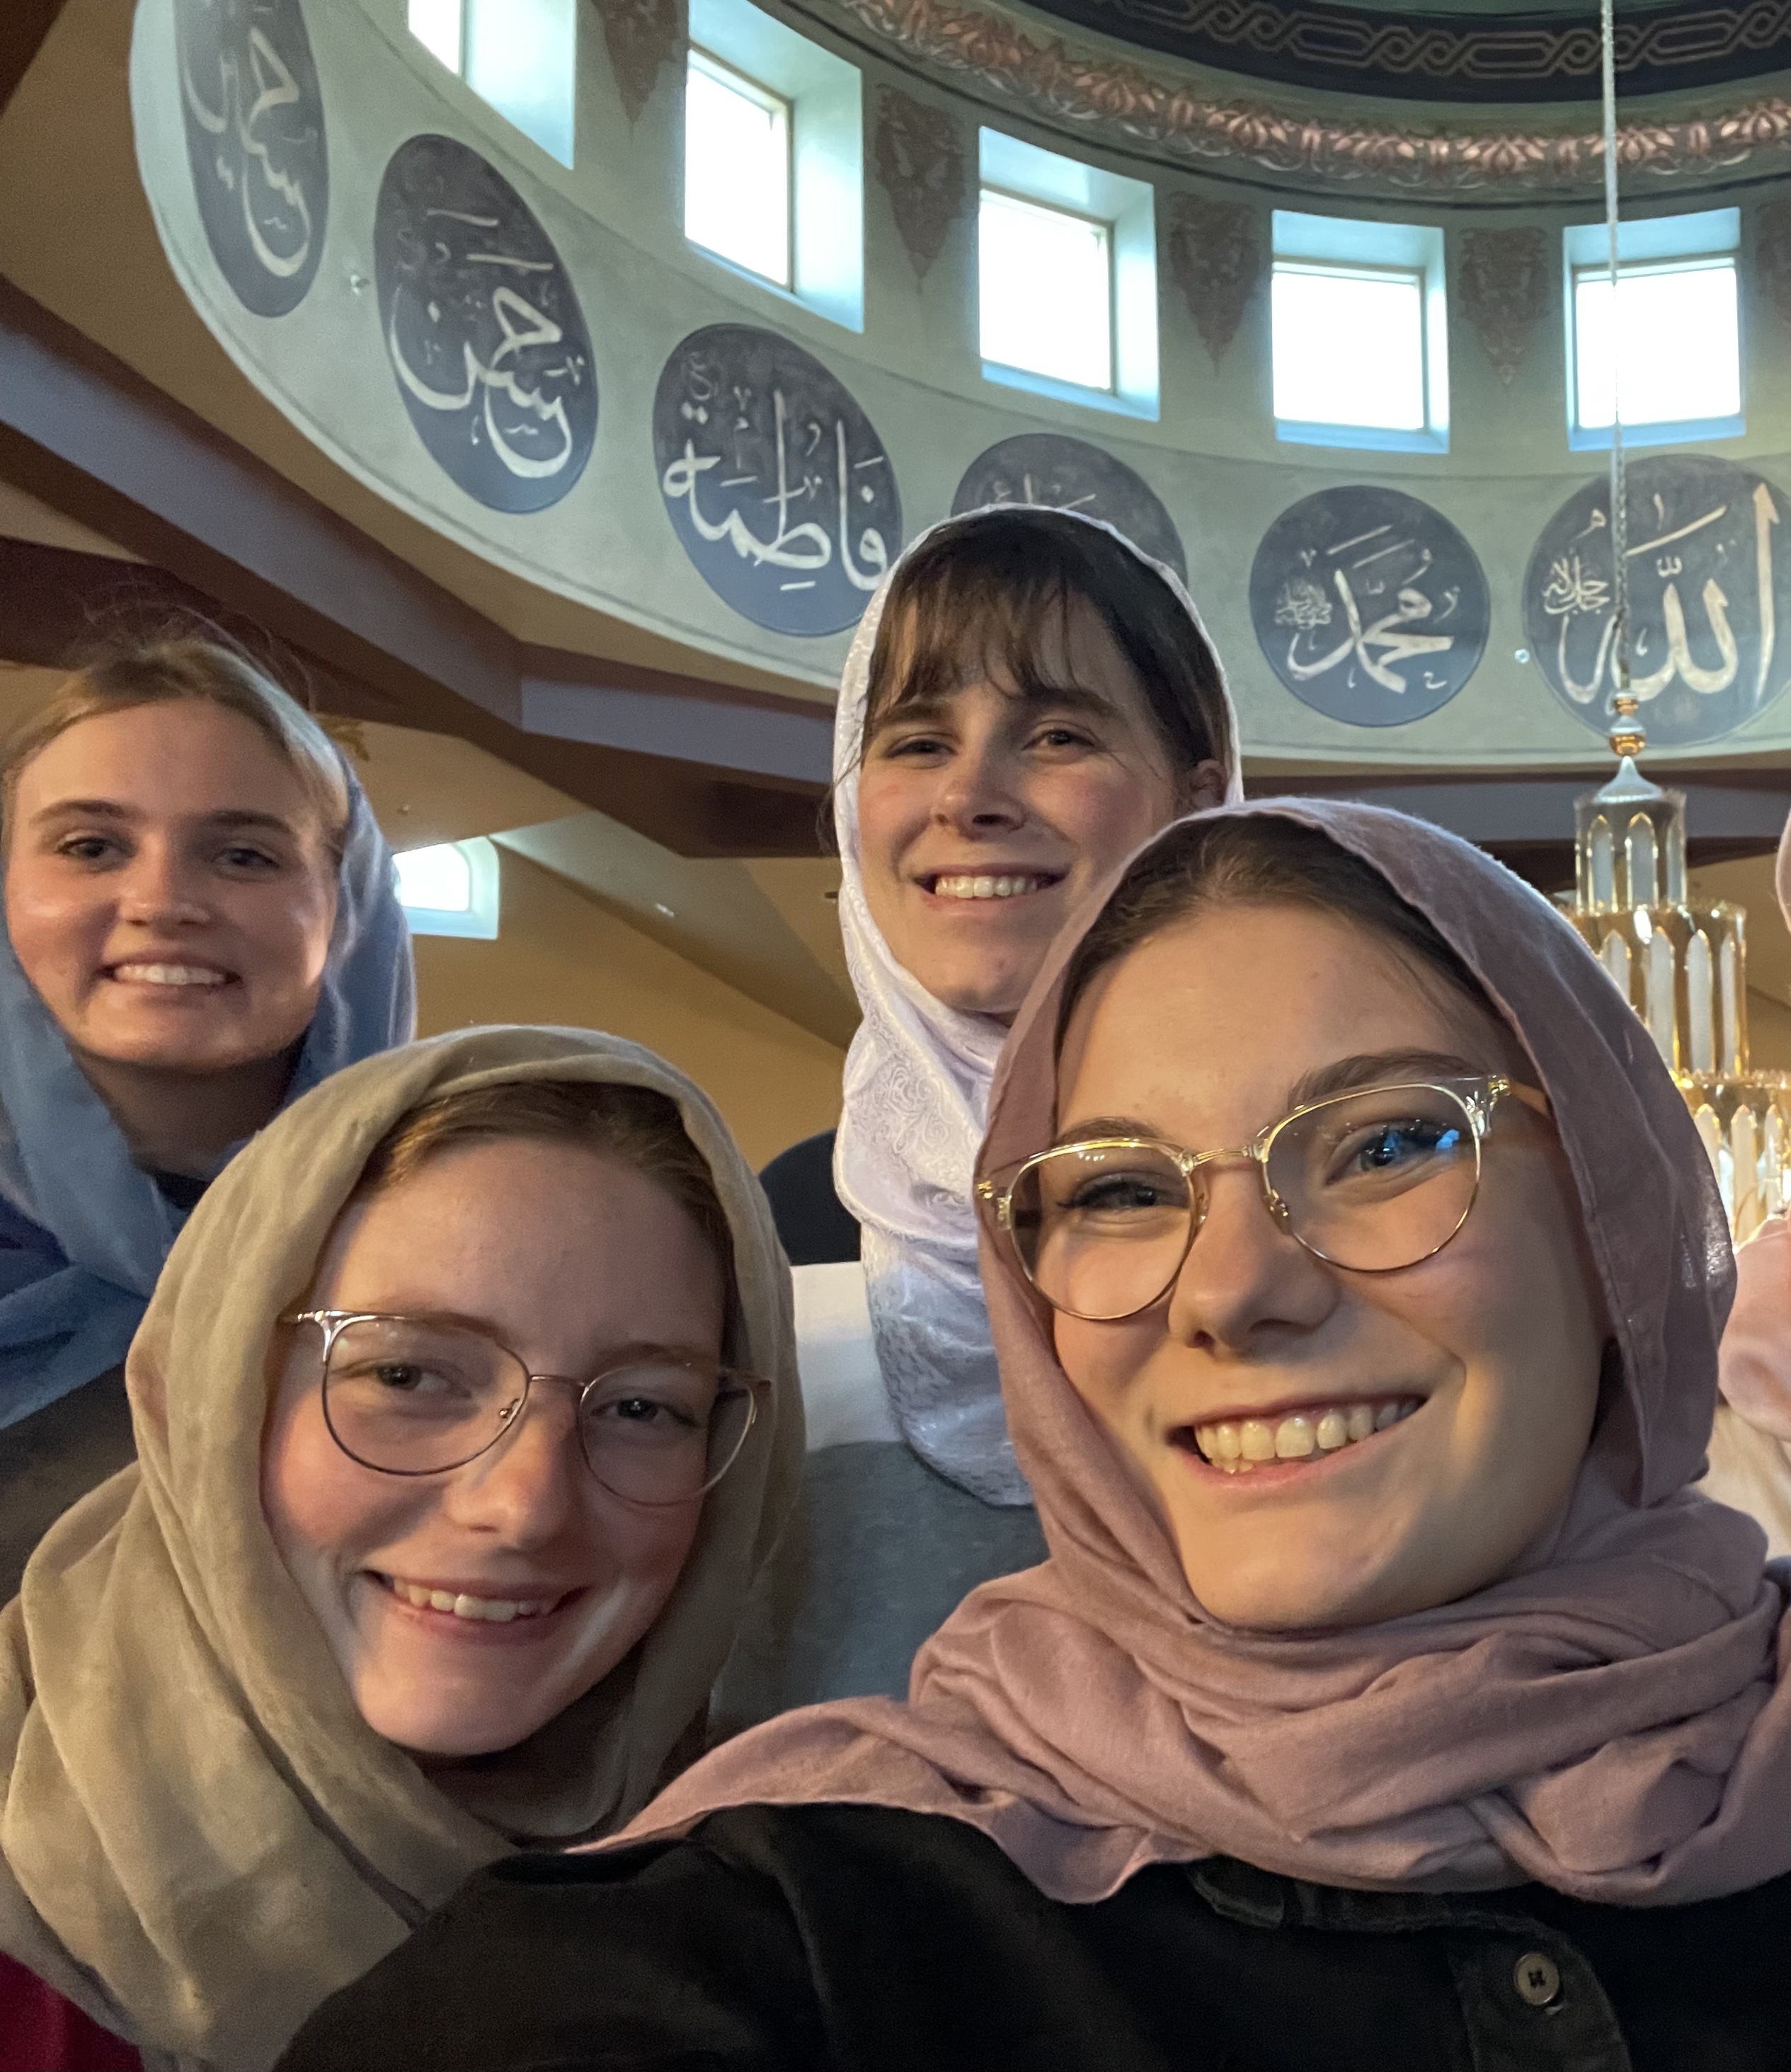 Eden smiling in a selfie with three other friends inside of a mosque